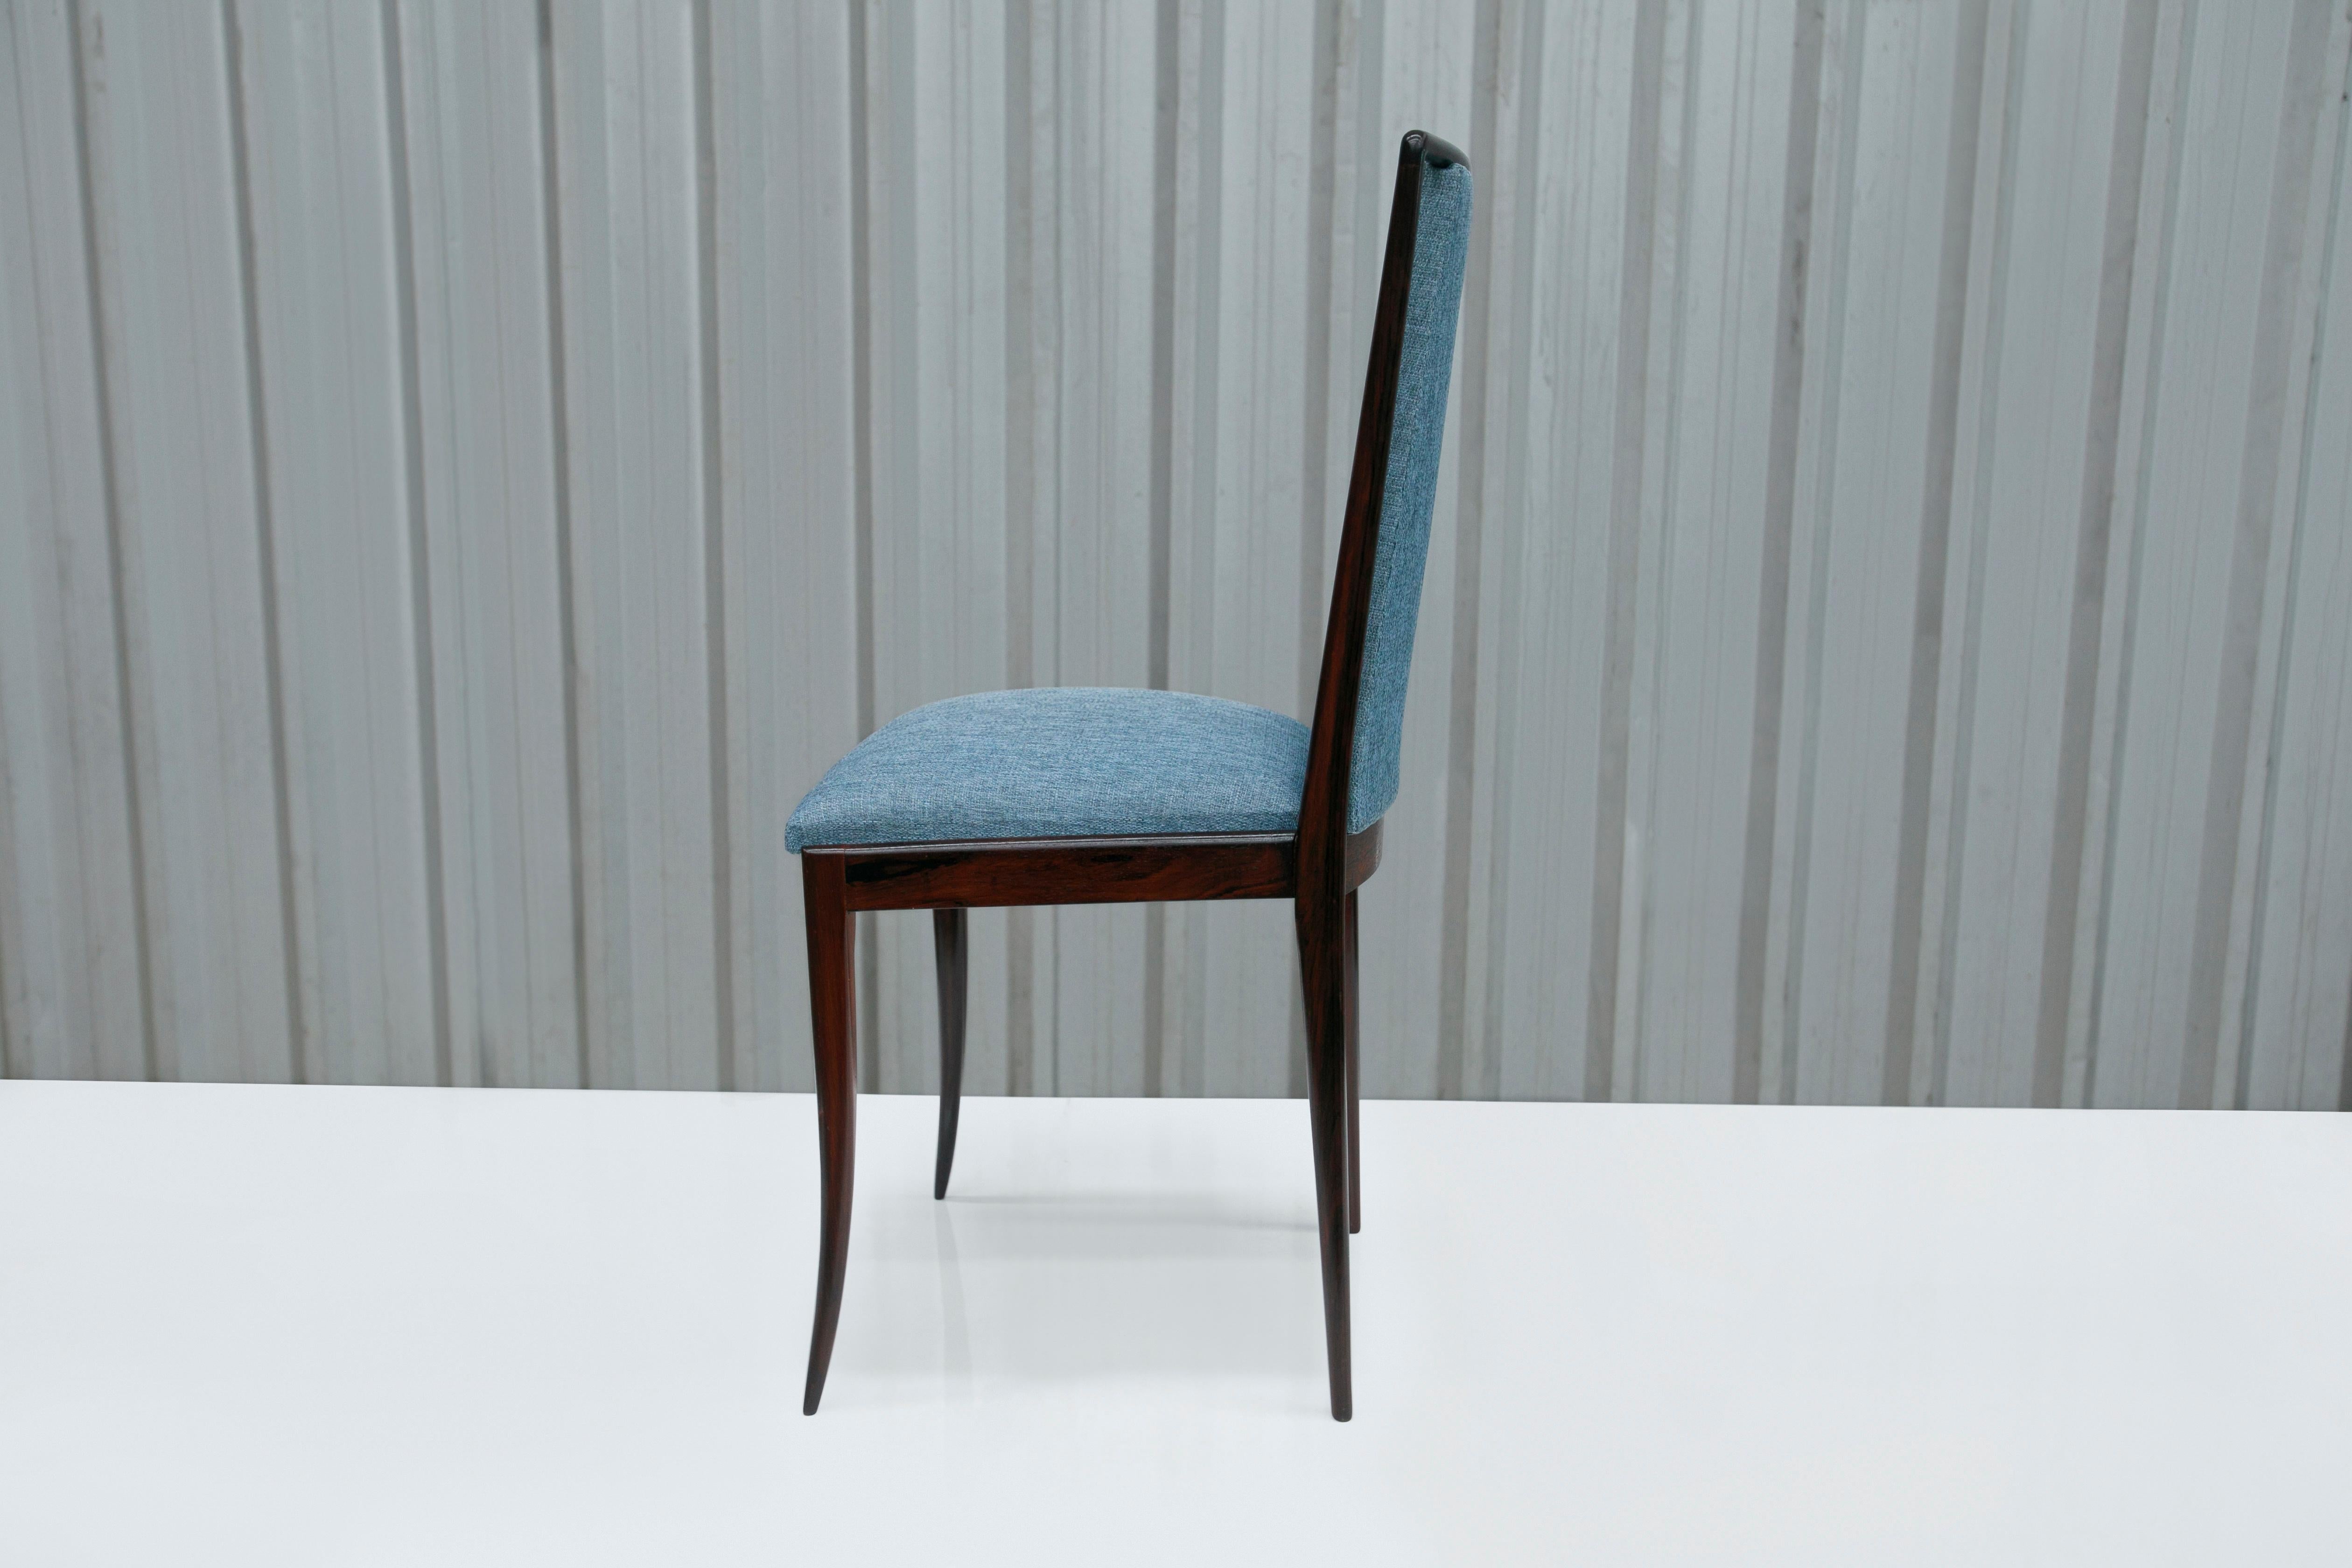 Mid-20th Century Brazilian Modern 4 Chair Set in Hardwood & Blue Fabric by G. Scapinelli, Brazi For Sale